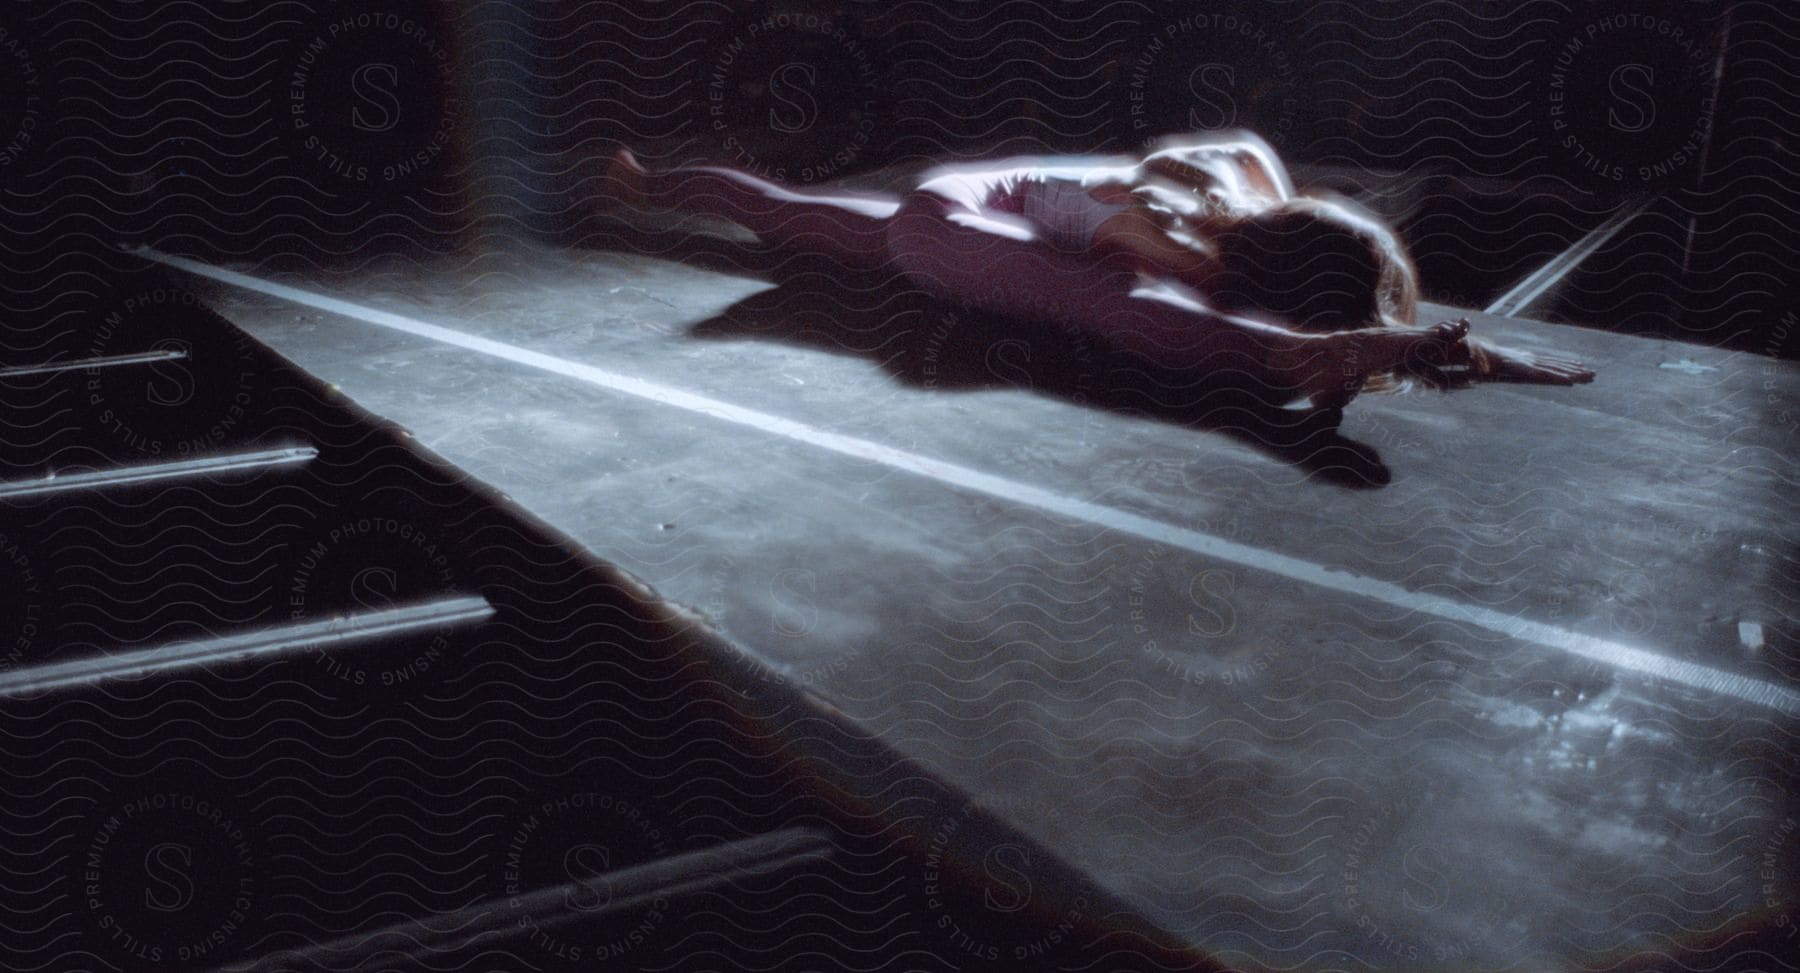 Ballet dancer stretching in a dimly lit theater